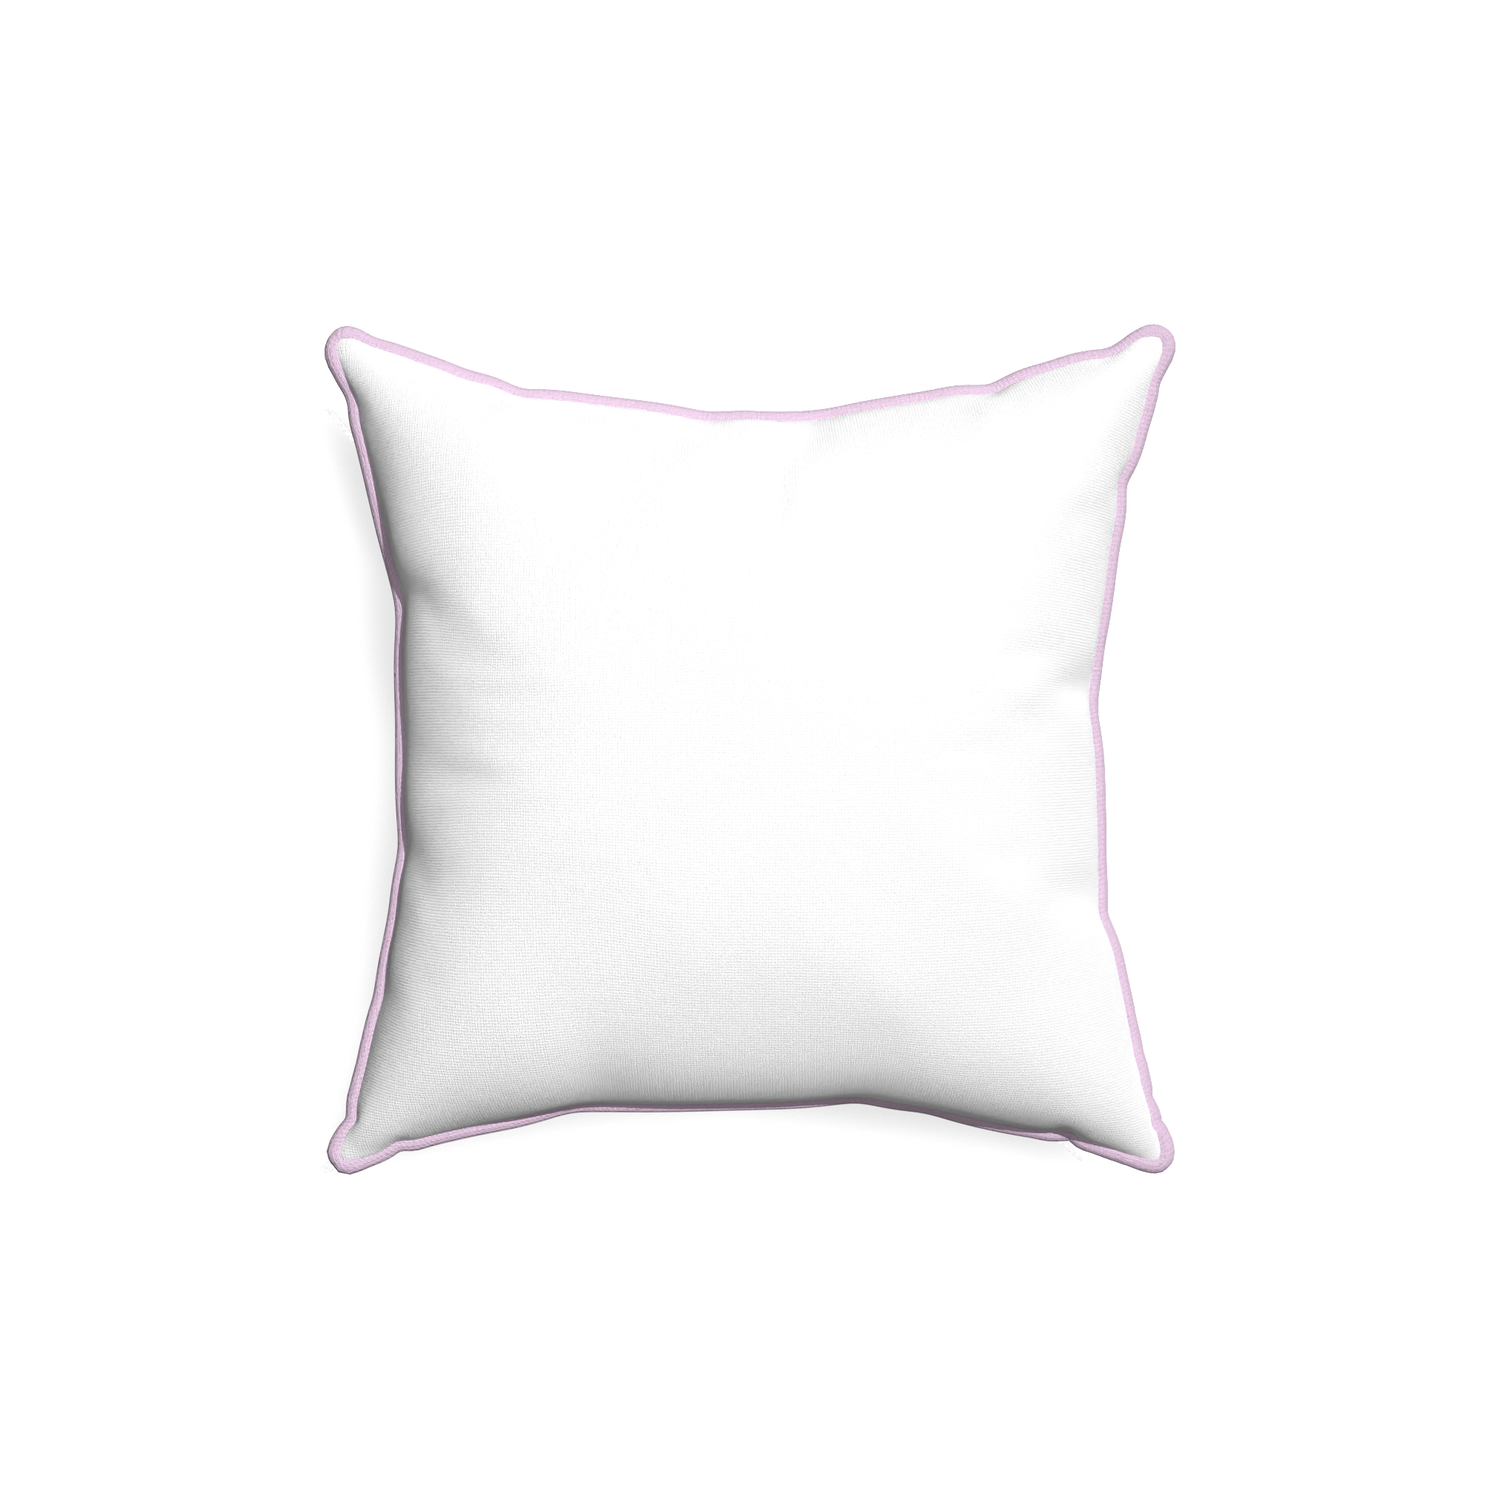 18-square snow custom pillow with l piping on white background